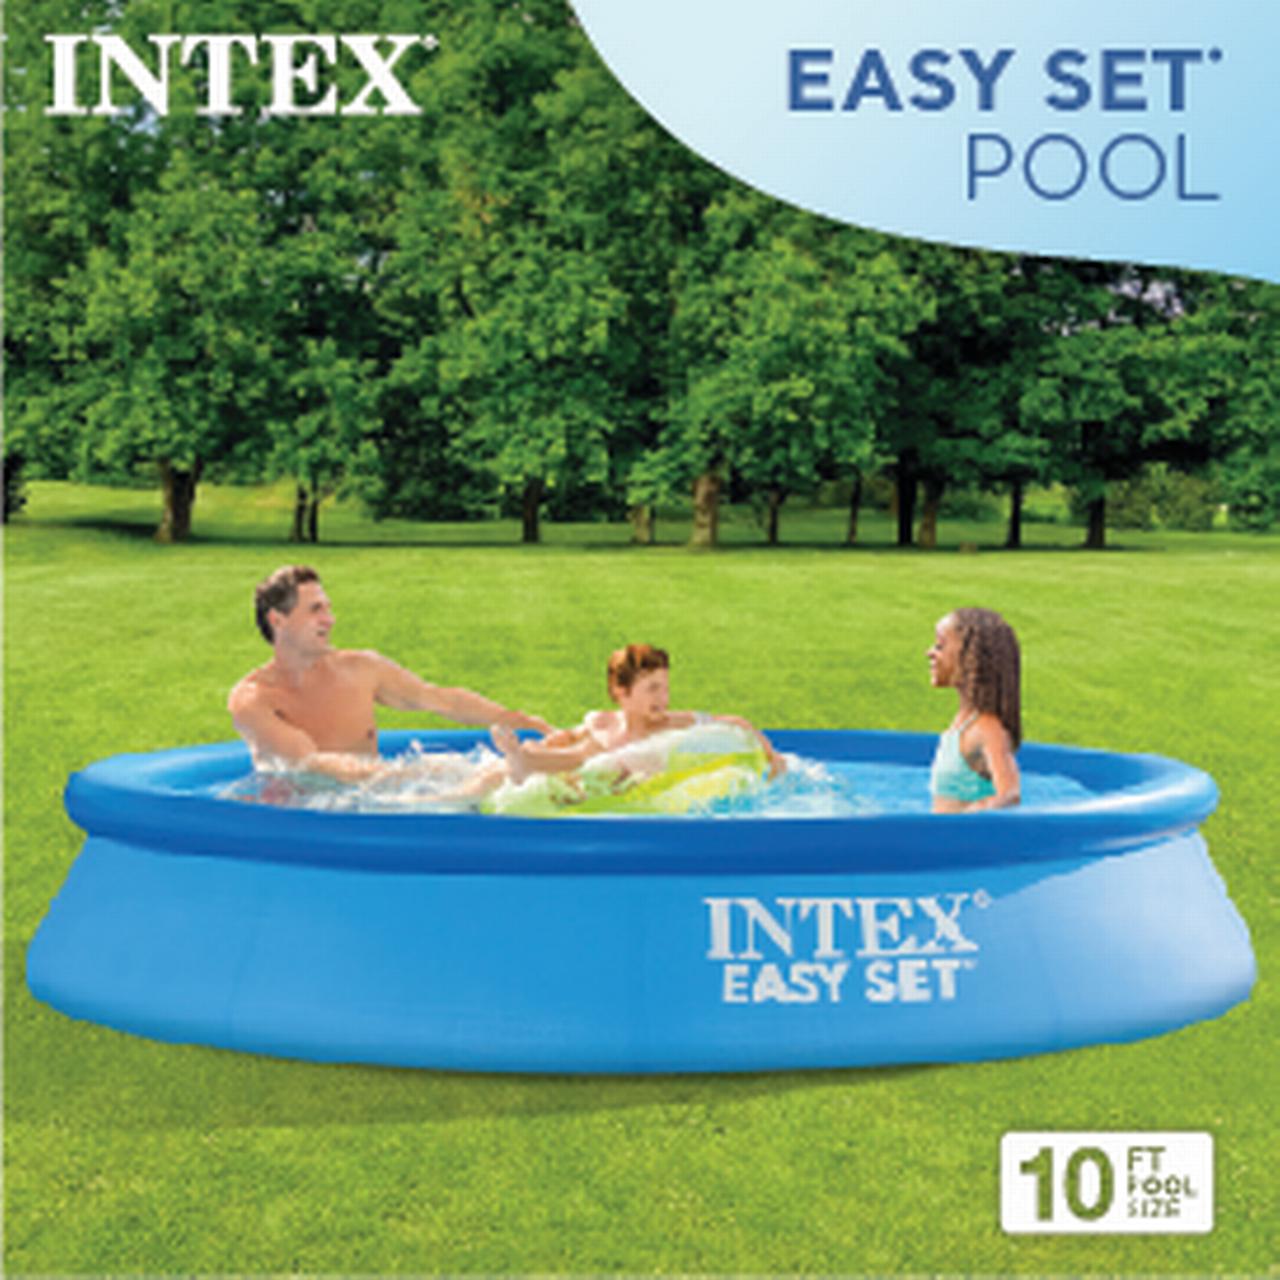 Intex 28116EH Round 10' X 2' Easy Set Inflatable Above Ground Portable Outdoor Pool for Kids and Adults, Blue - image 3 of 9